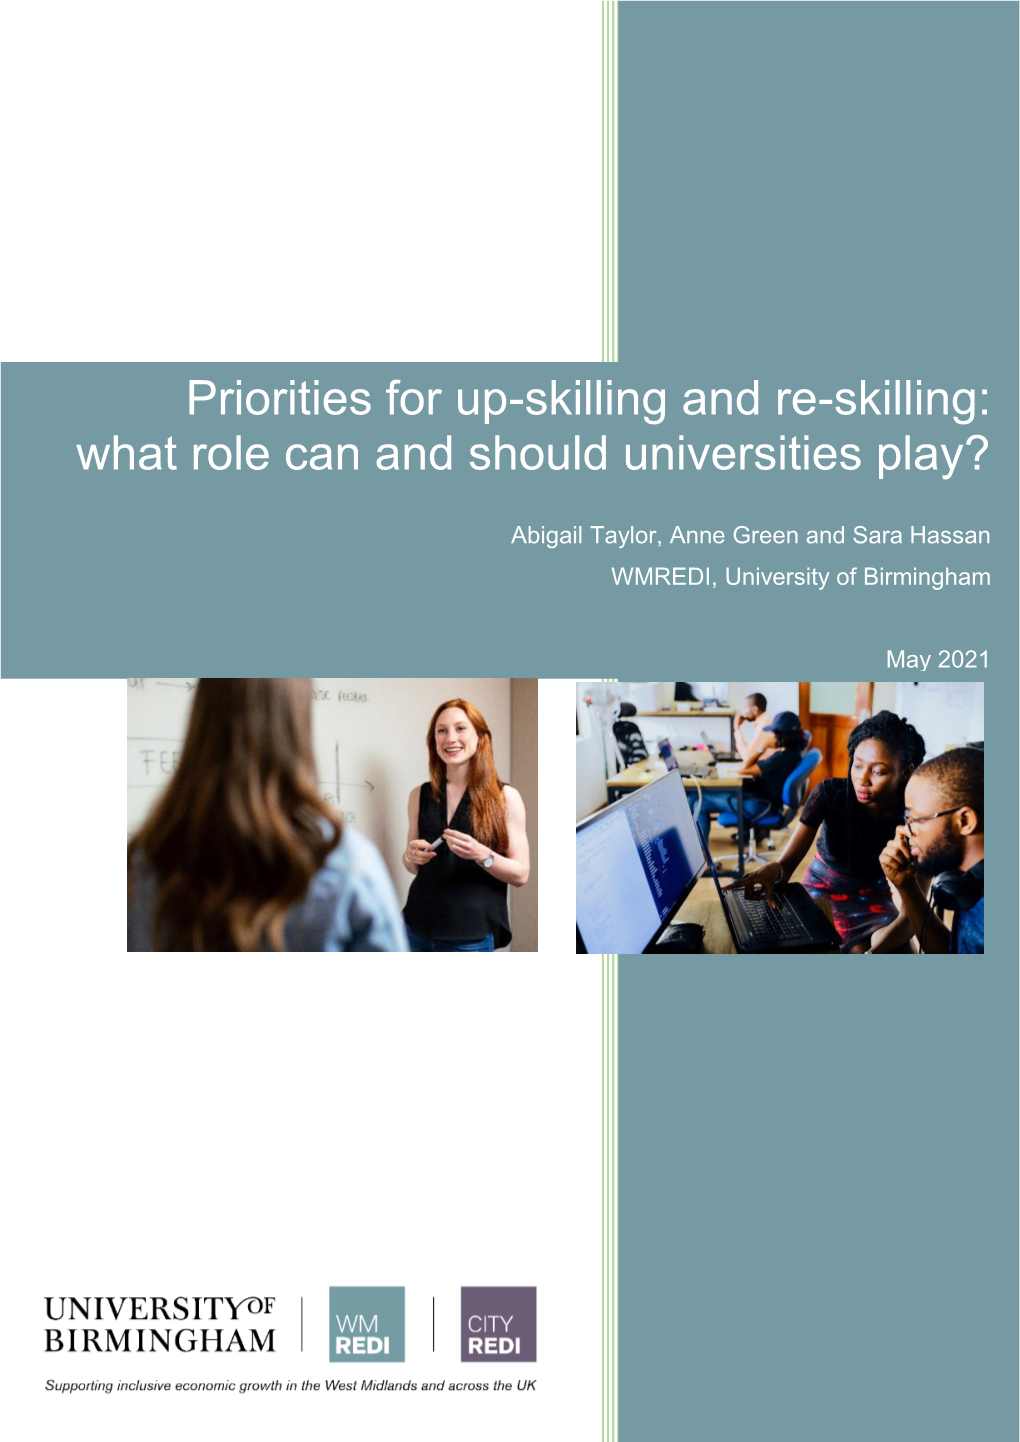 Priorities for Up-Skilling and Re-Skilling: What Role Can and Should Universities Play?